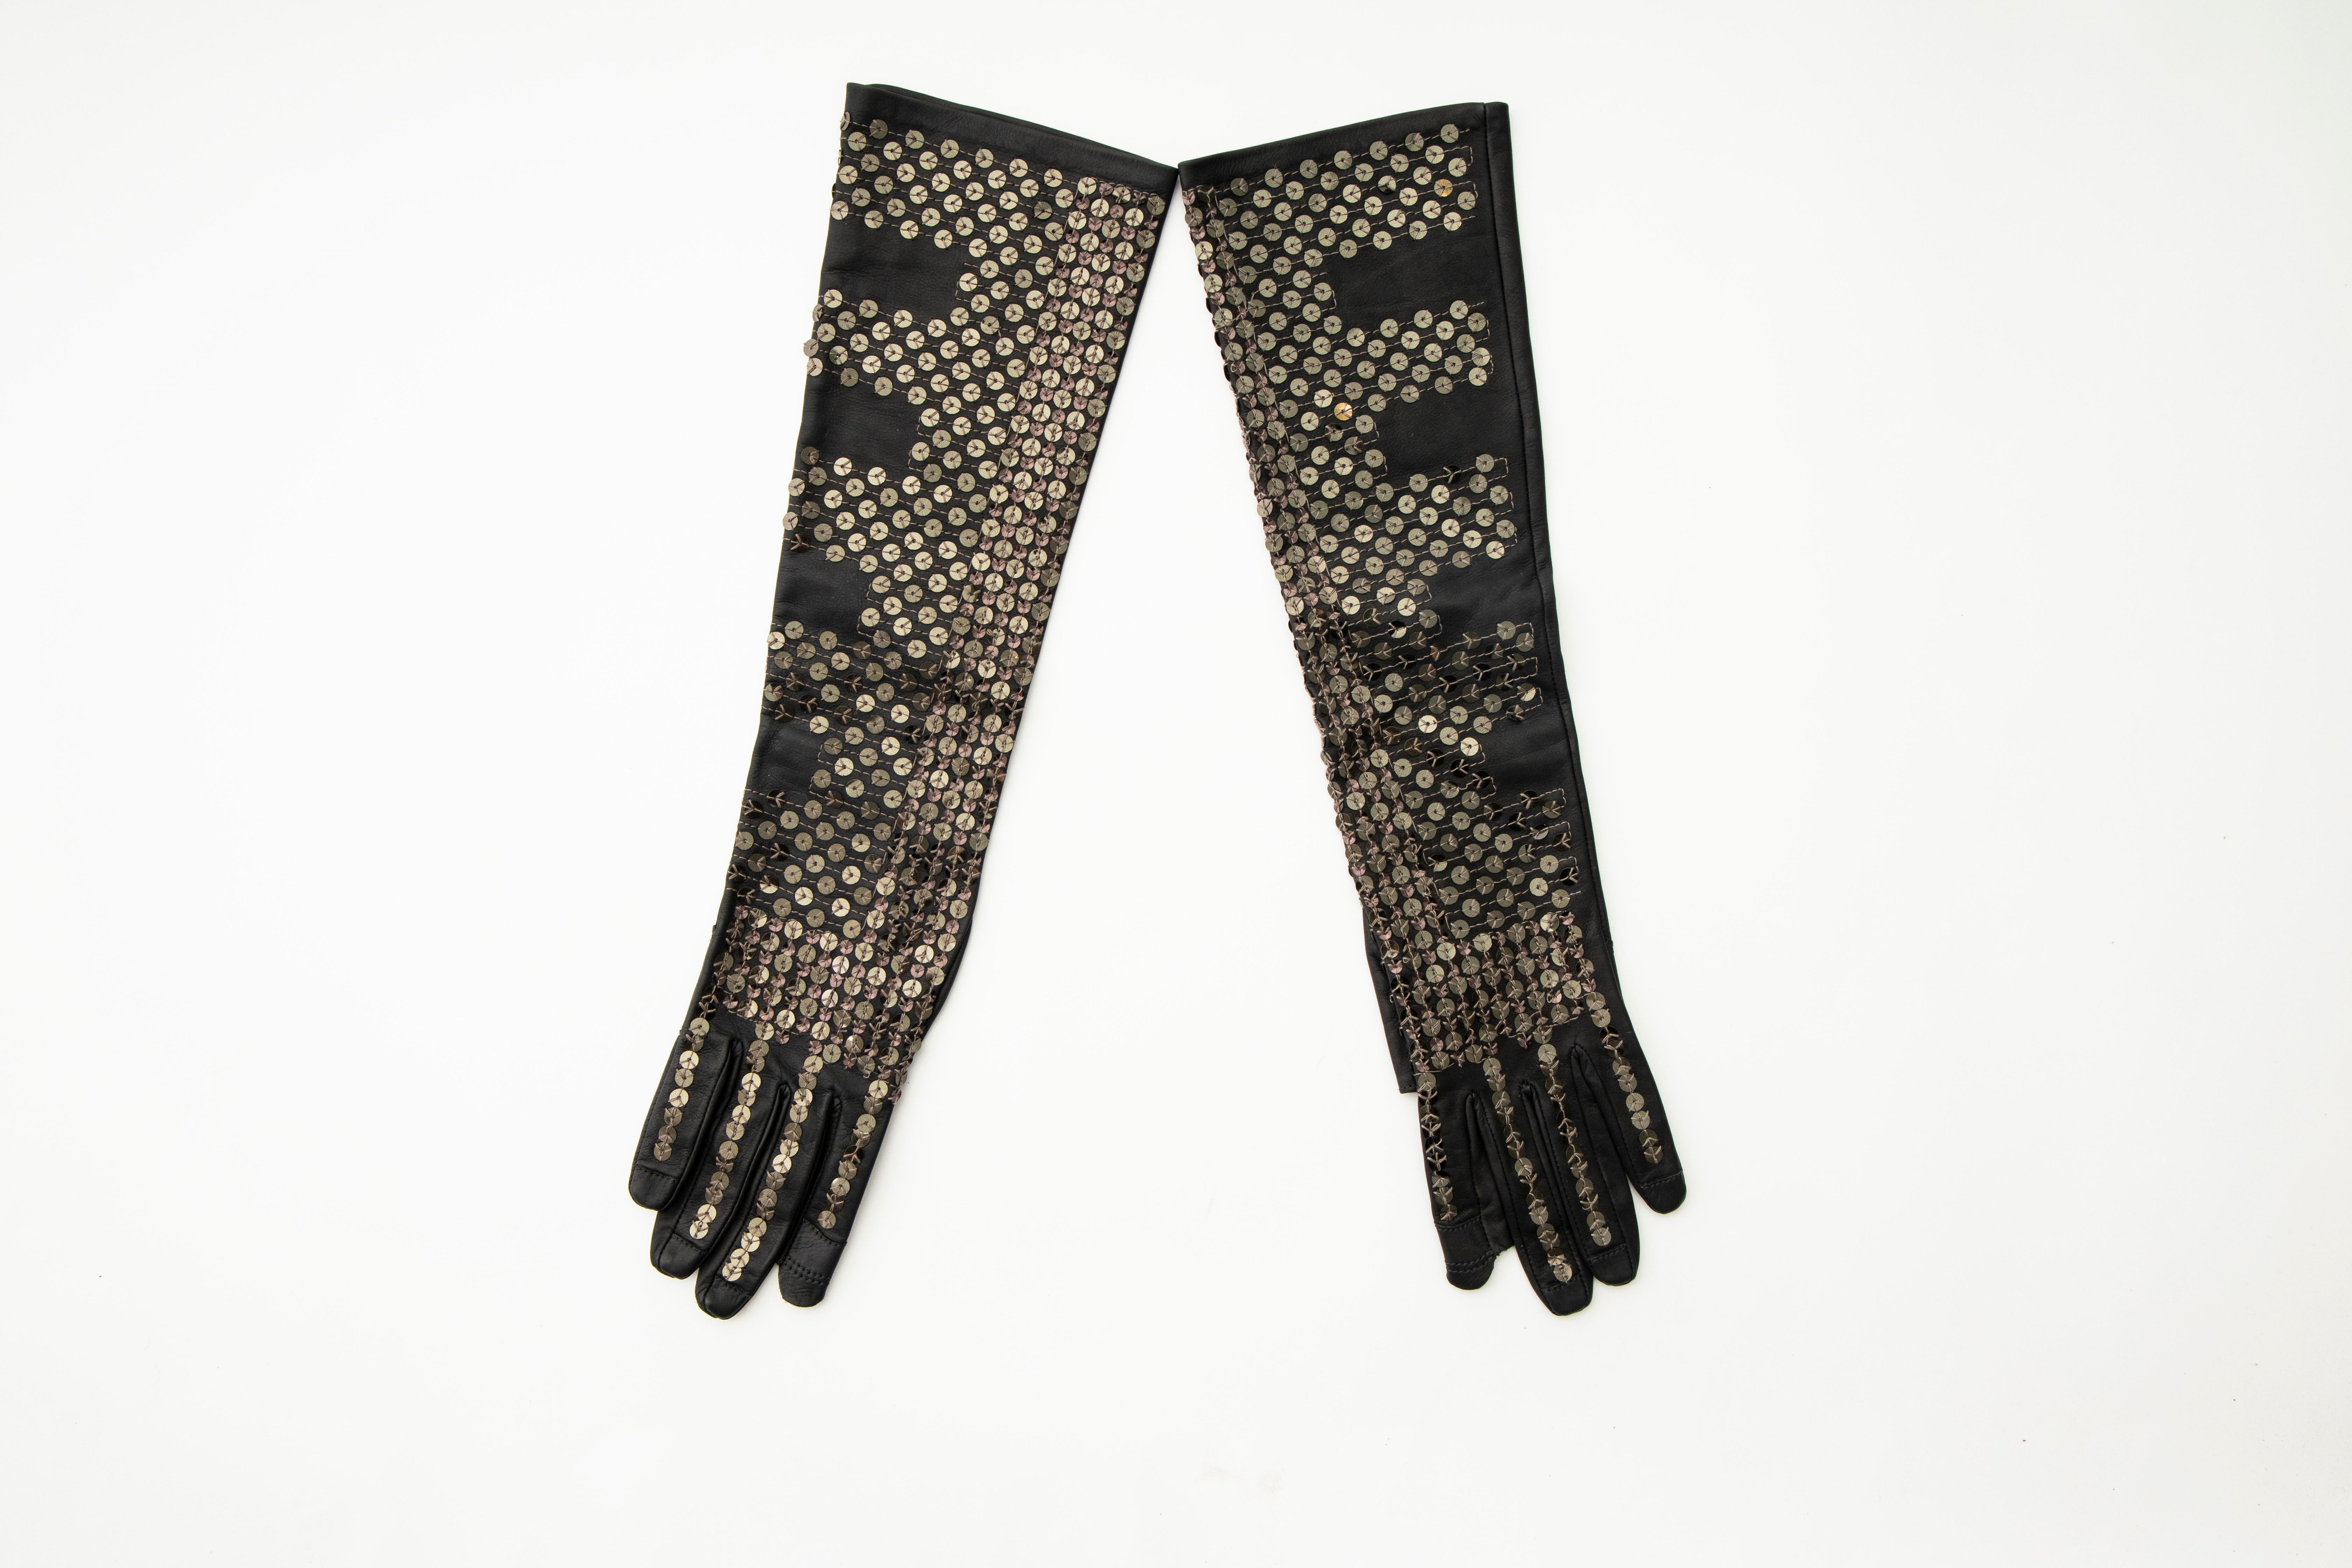 Rick Owens, Fall 2015 Runway black/dark dust leather gloves with fingerless thumb and index finger and stitched sequins embellishments throughout. 

Size: 7

Length: 17.5